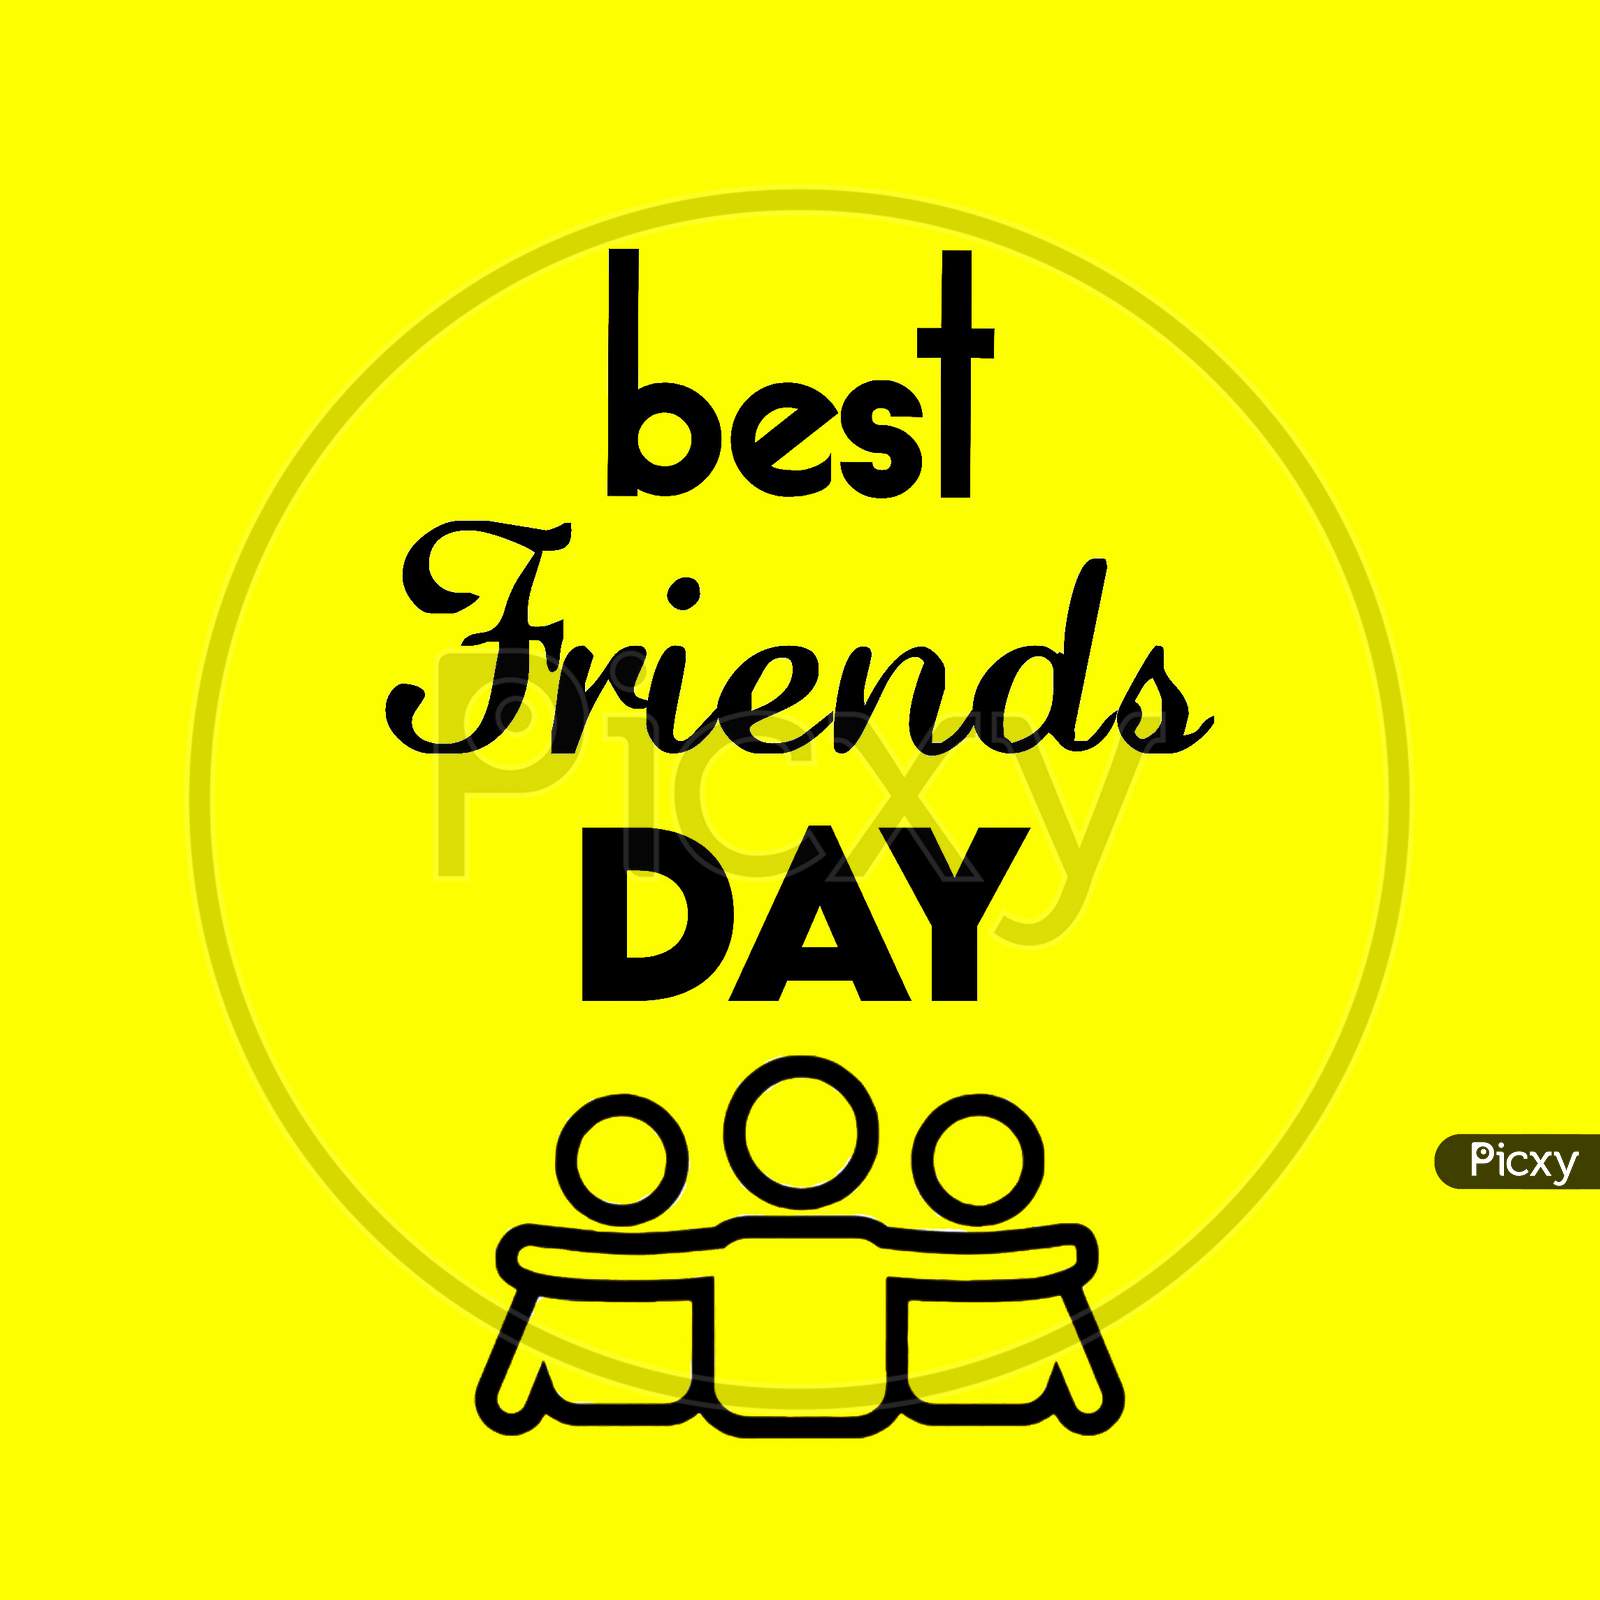 National Best Friends Day Vector image with background of yellow and letters is in black. Best friends day celebration.